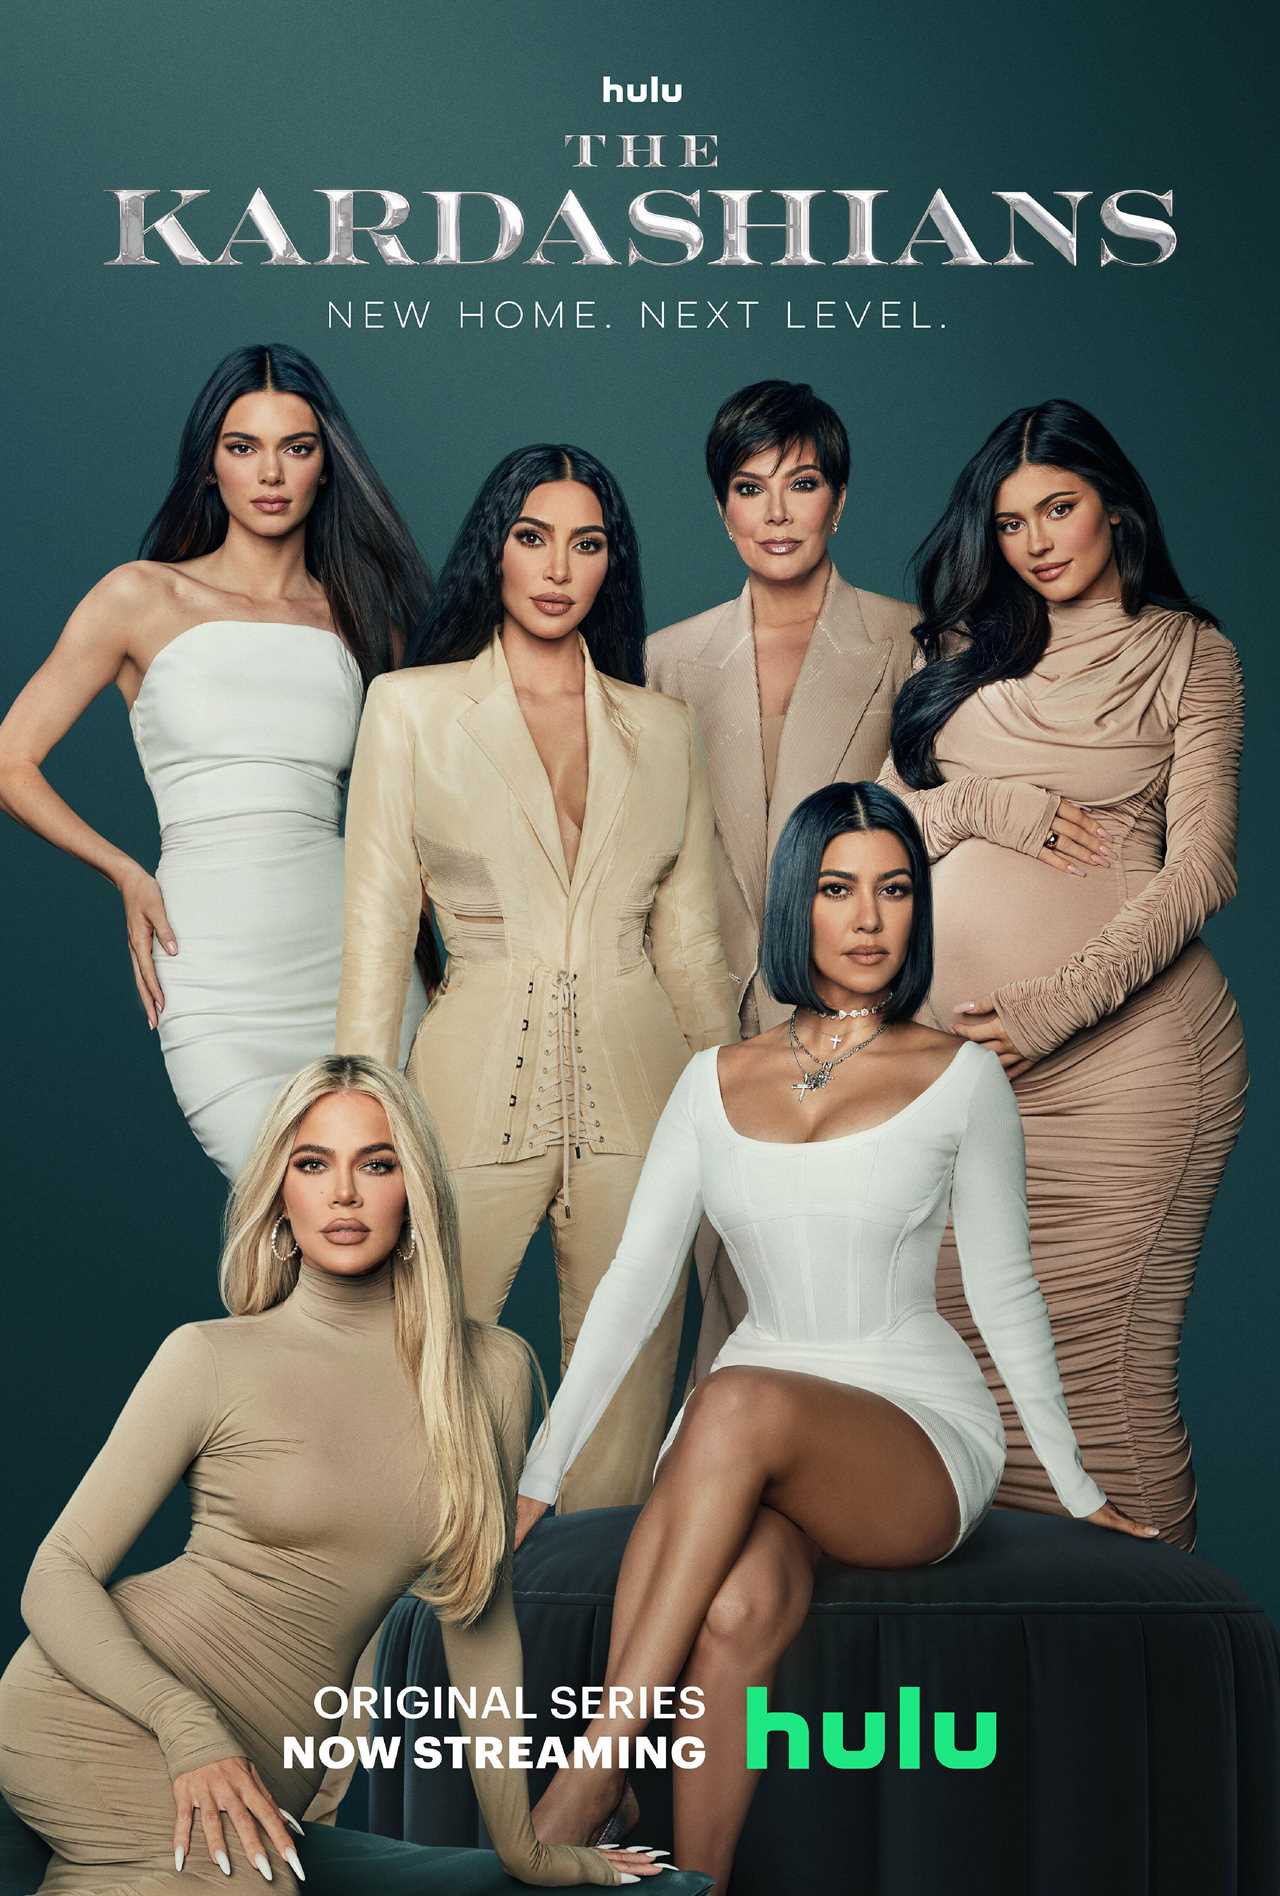 Kim Kardashian reveals real size in new photos as she shows off her shrinking waist and butt in skintight white leggings